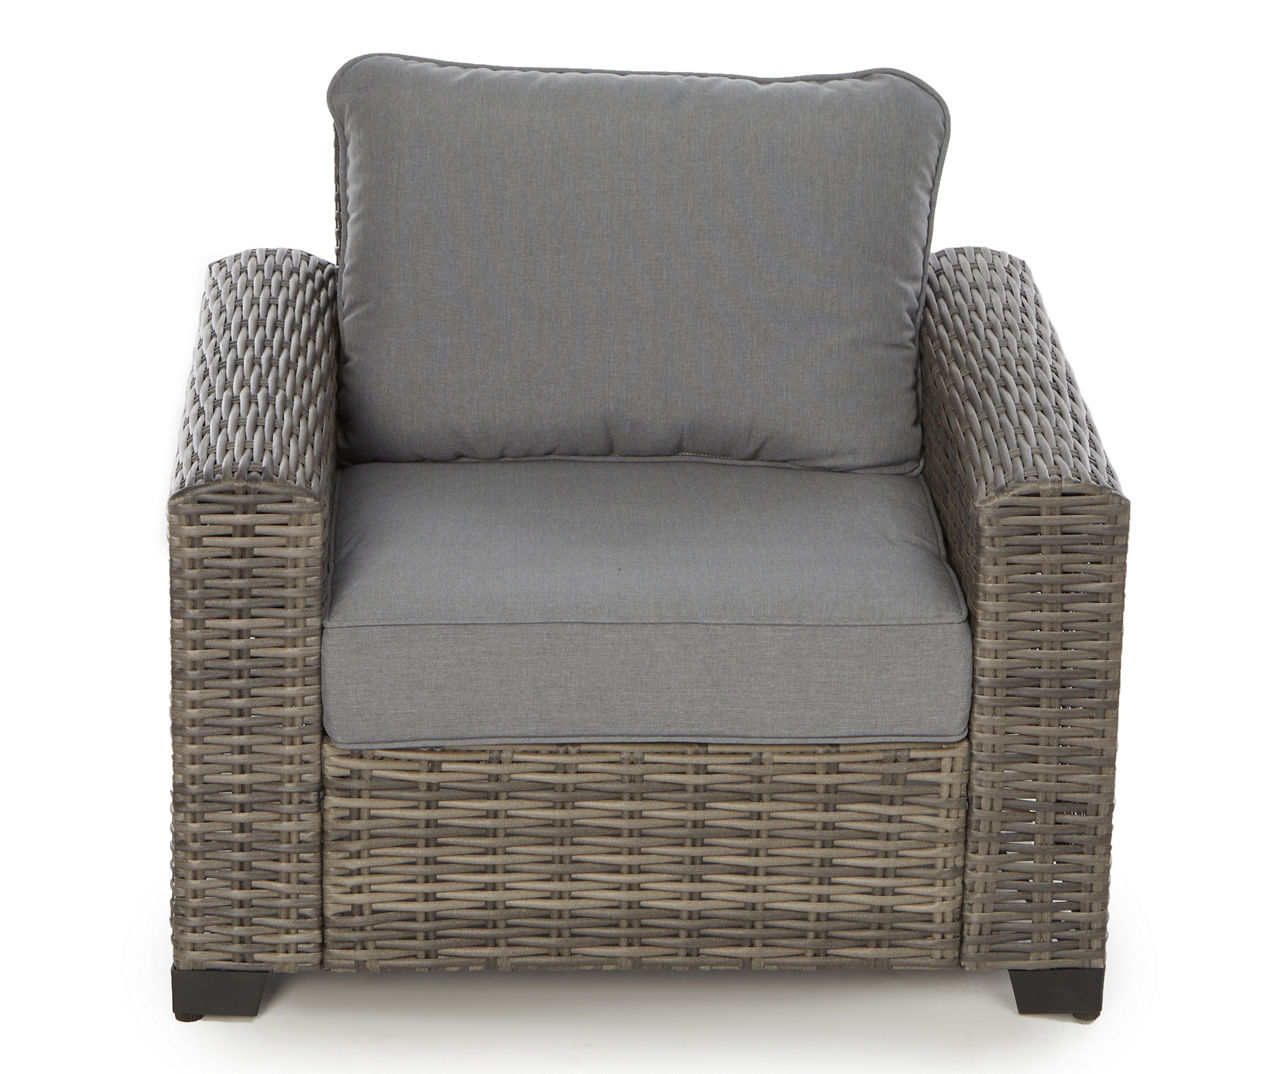 Pembroke All-Weather Wicker Cushioned Patio Lounge Chair